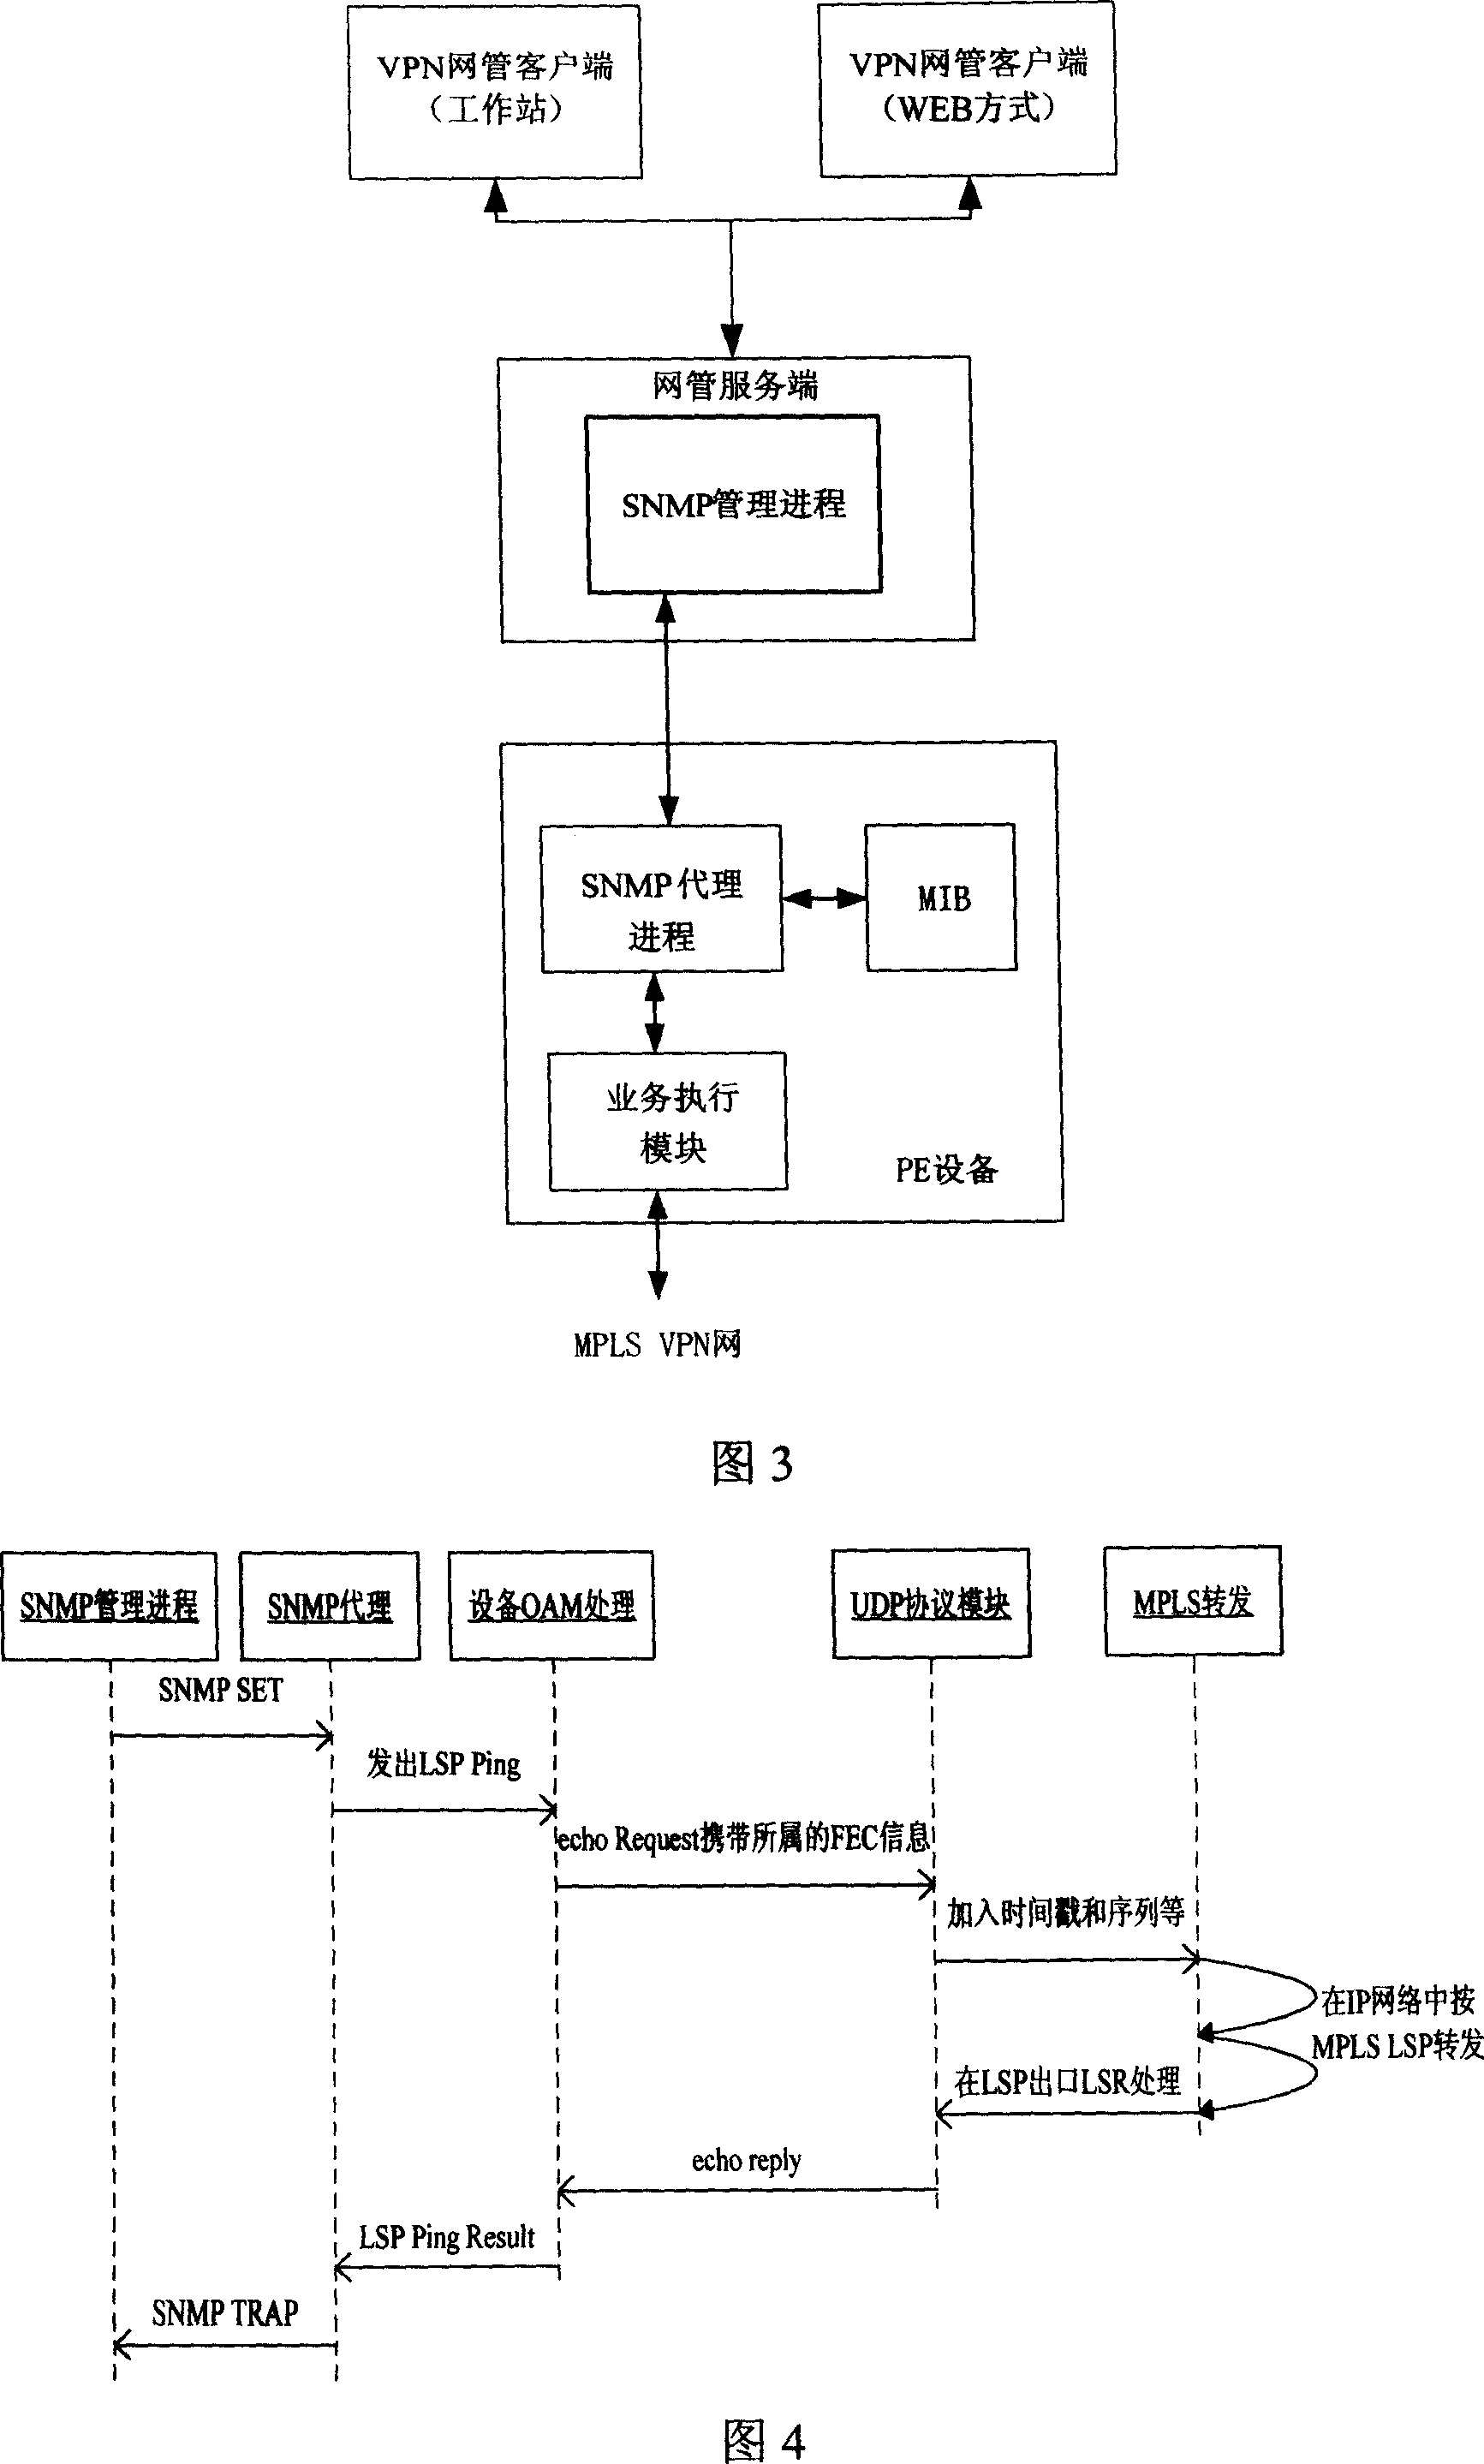 Method for detecting connectivity of multi-protocol label switching virtual private network